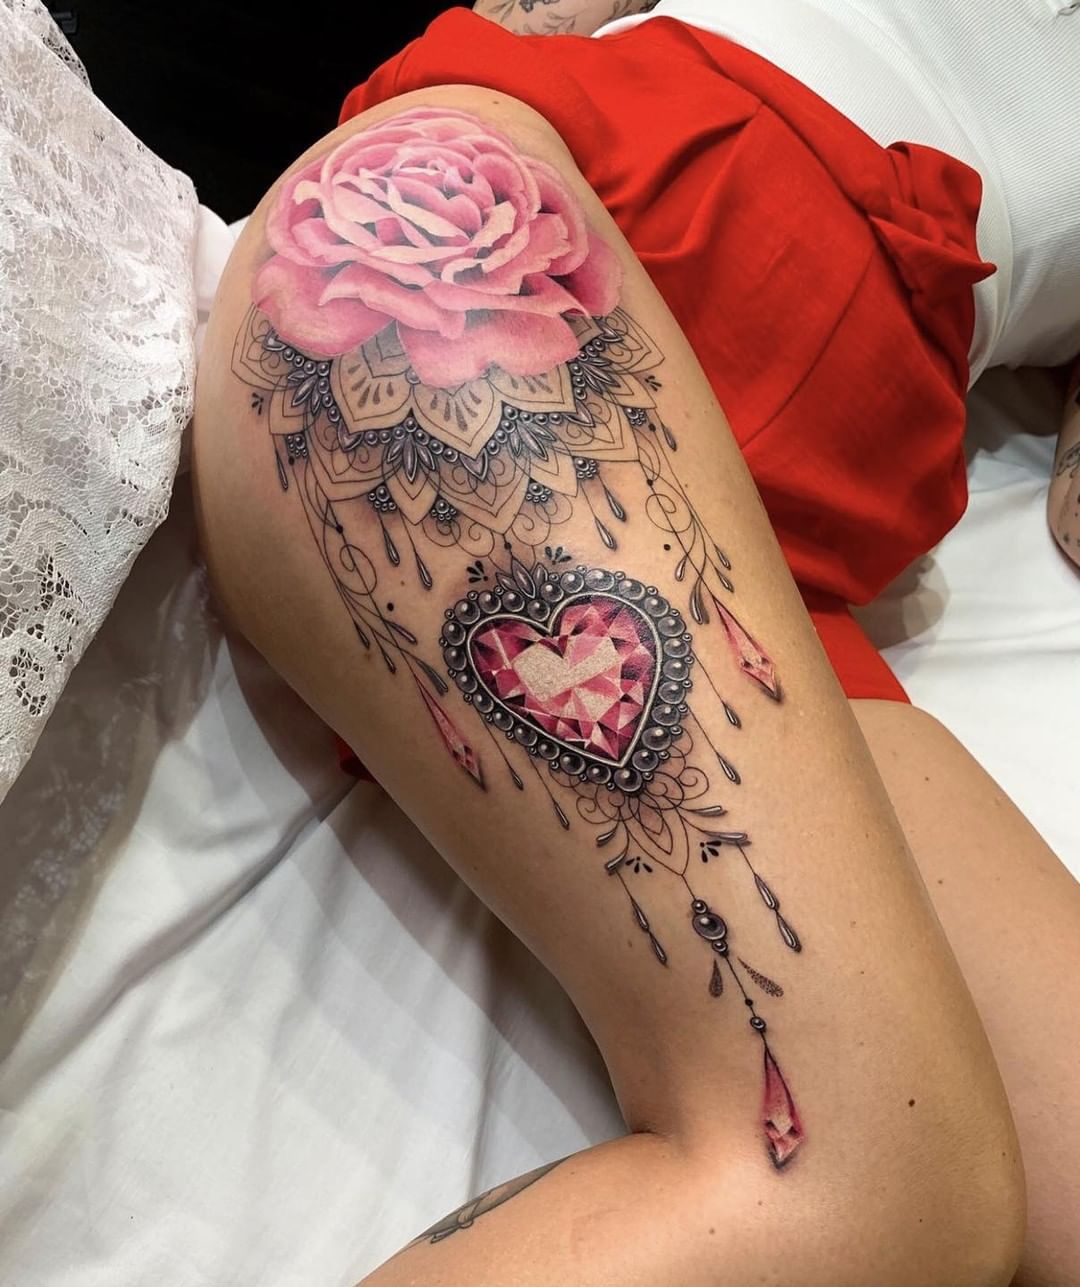 Some women love the power of mandalas and unique creations. If you’re a picky person who likes giant and detail-oriented ideas, this will suit you. Heads up wince this tattoo can be quite pricey to go for.